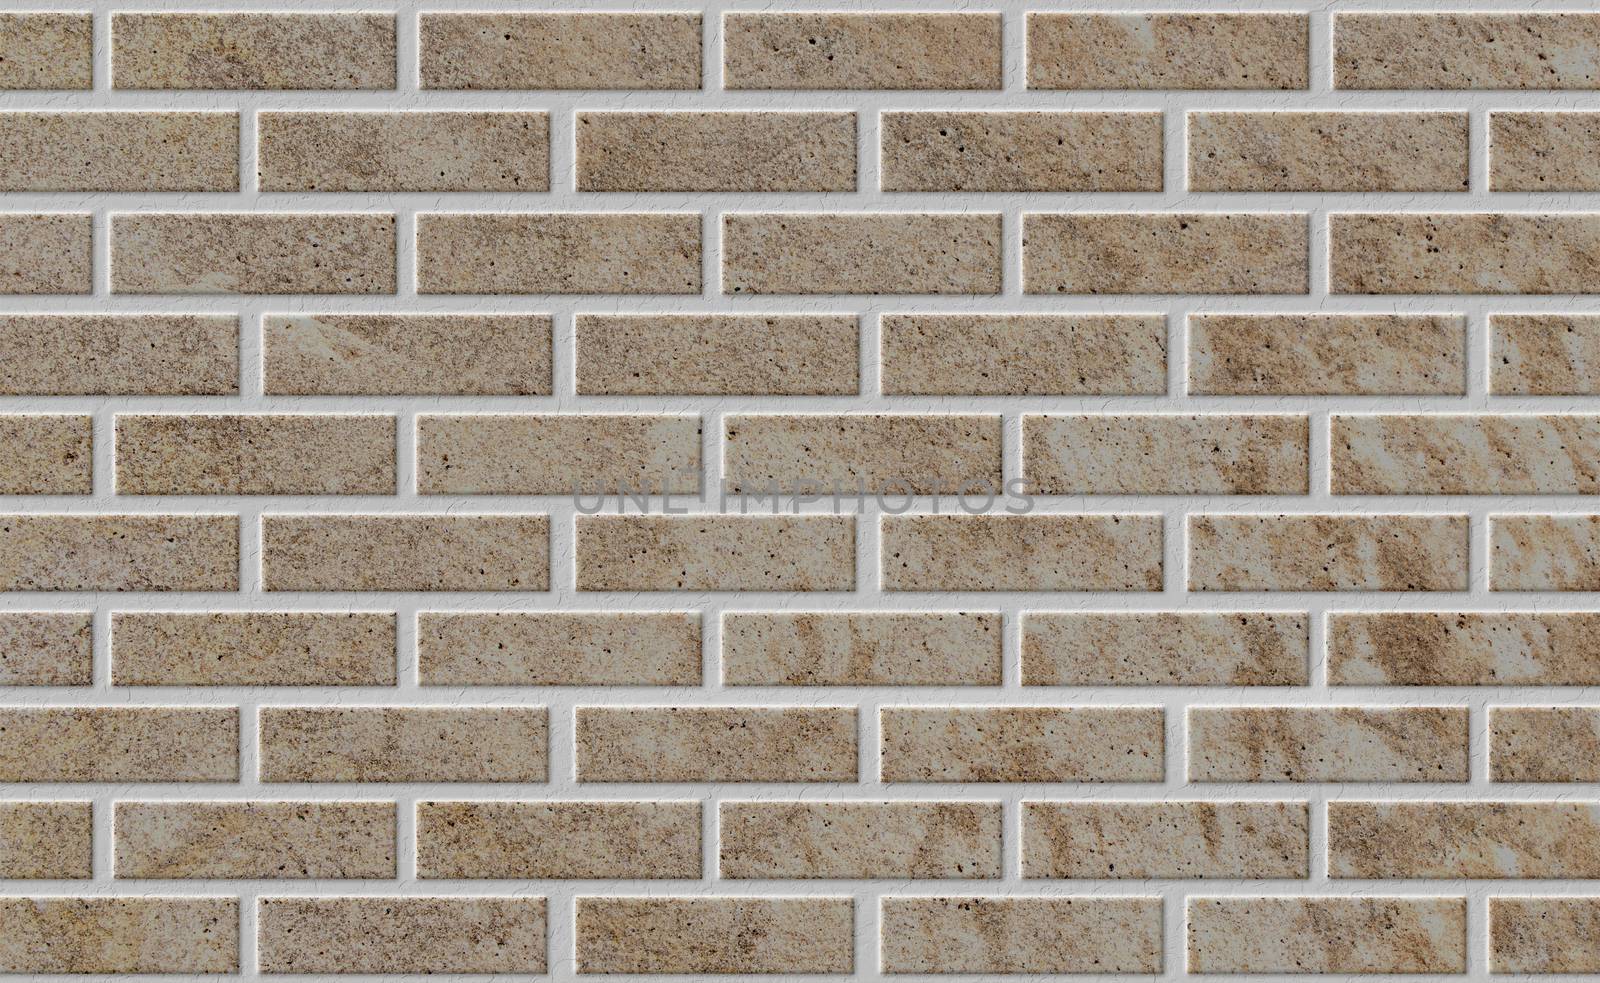 brick wall illustration by Visual-Content